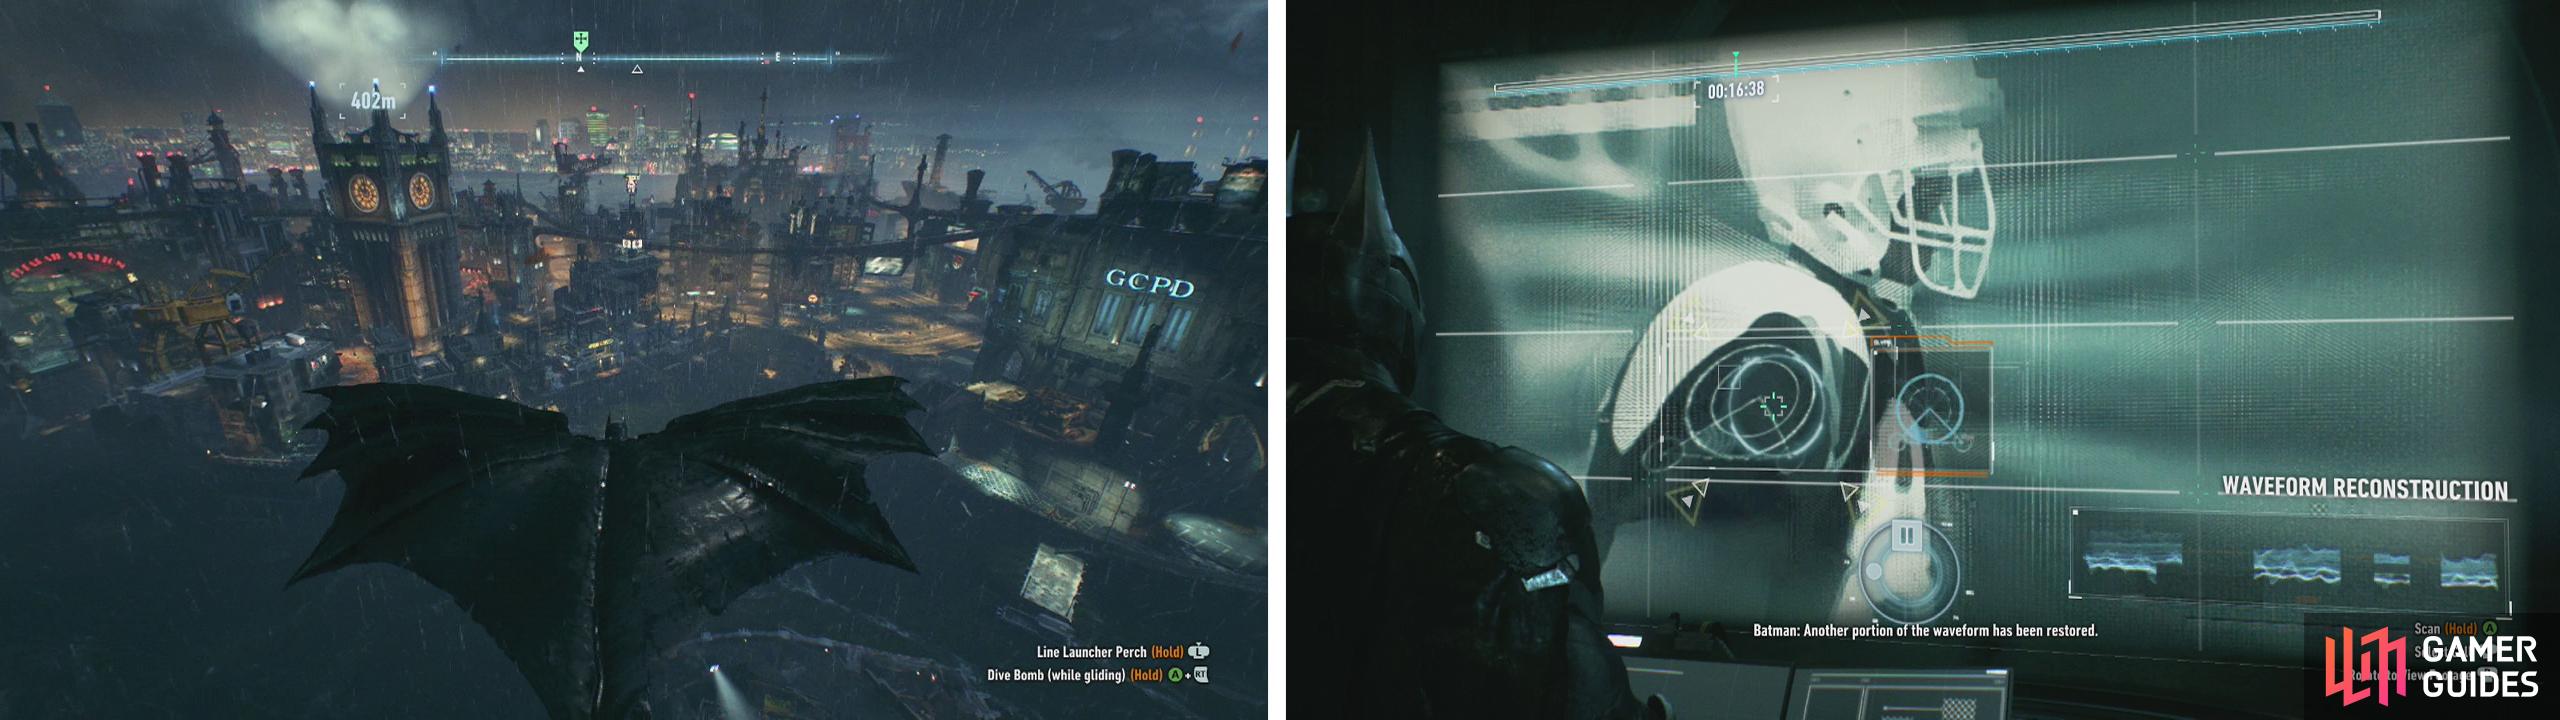 Return to the Clock Tower (left) and scan the symbols within the video (right).